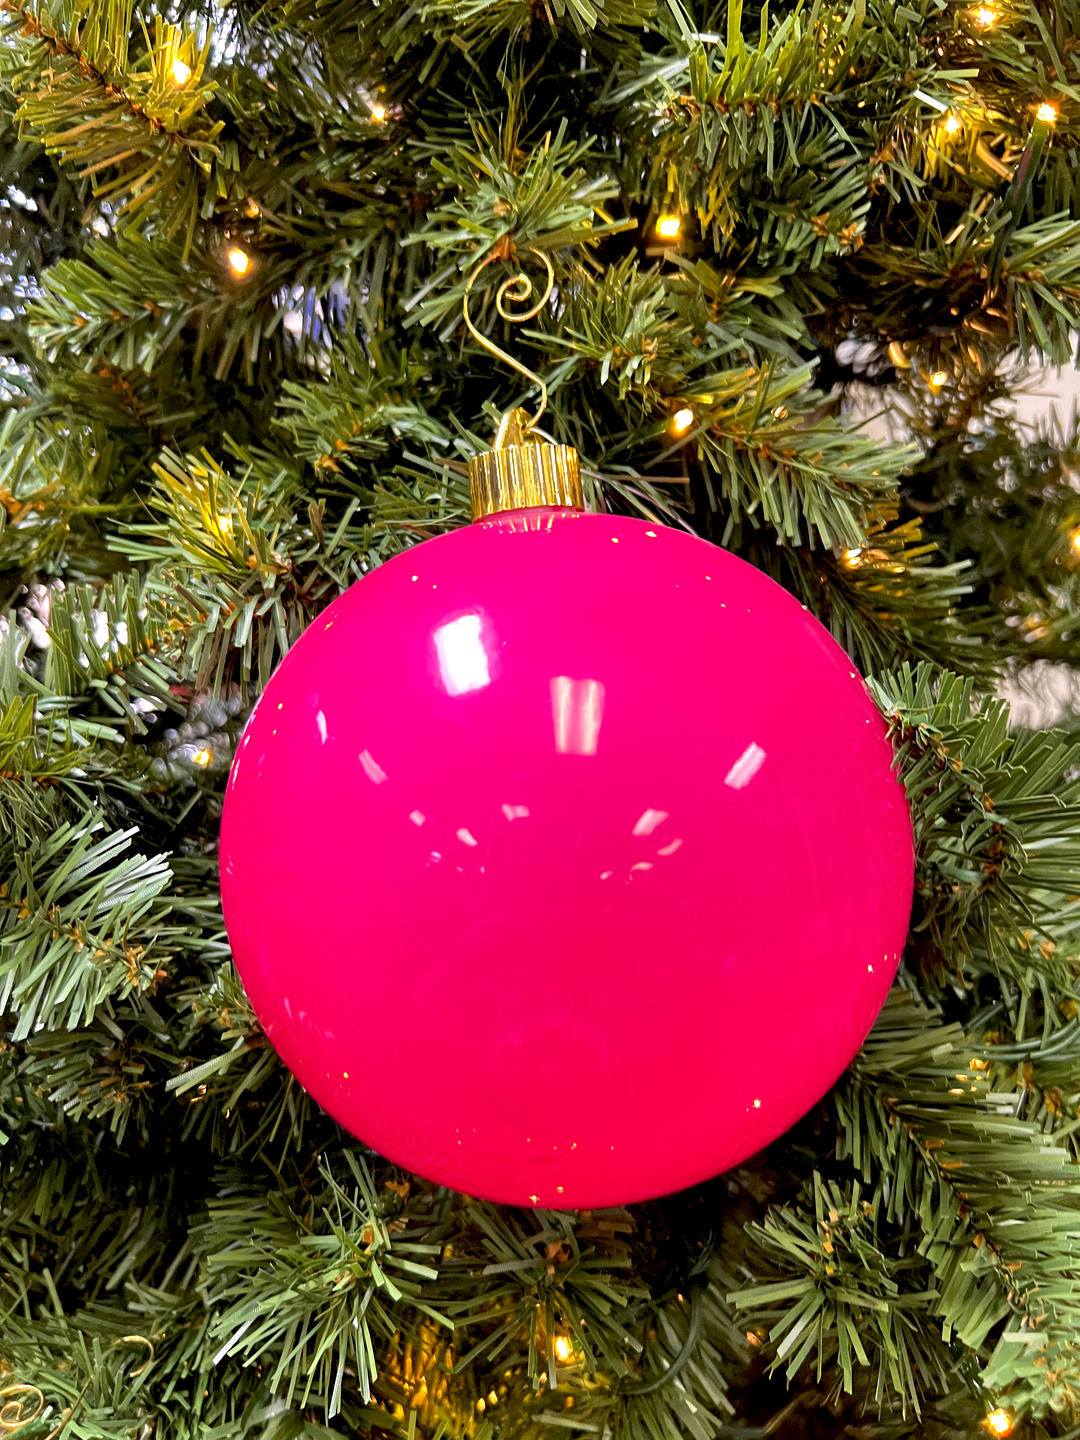 6" (150mm) Large Commercial Shatterproof Ball Ornaments, Dragon Fruit Pink, 1/Box, 12/Case, 12 Pieces